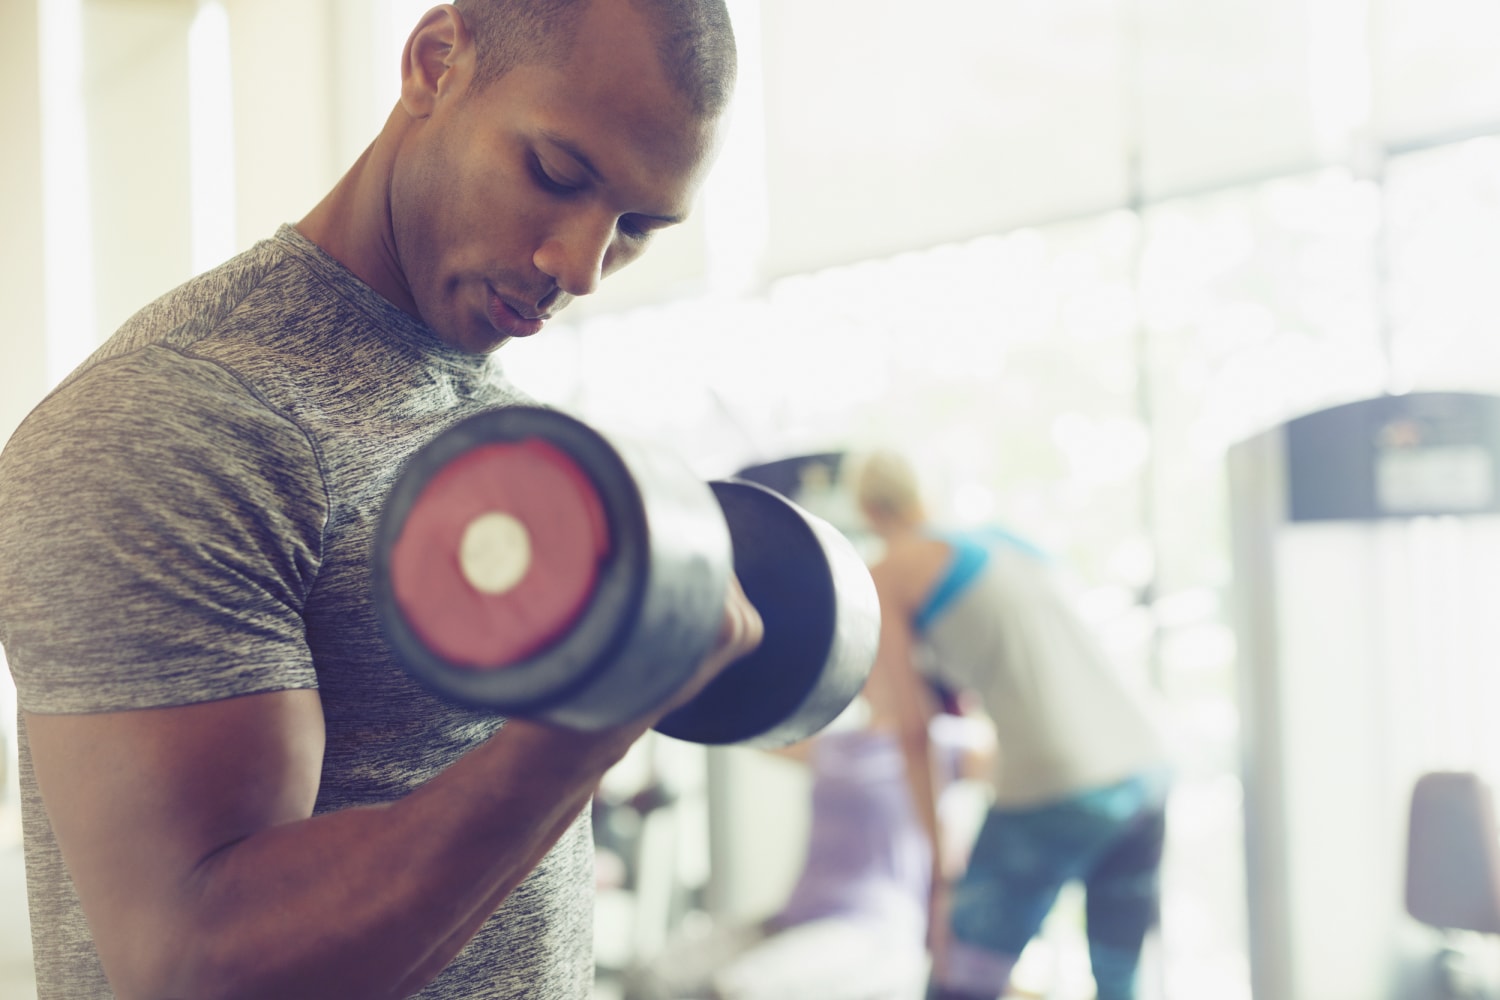 7 benefits of strength training that go beyond building muscle